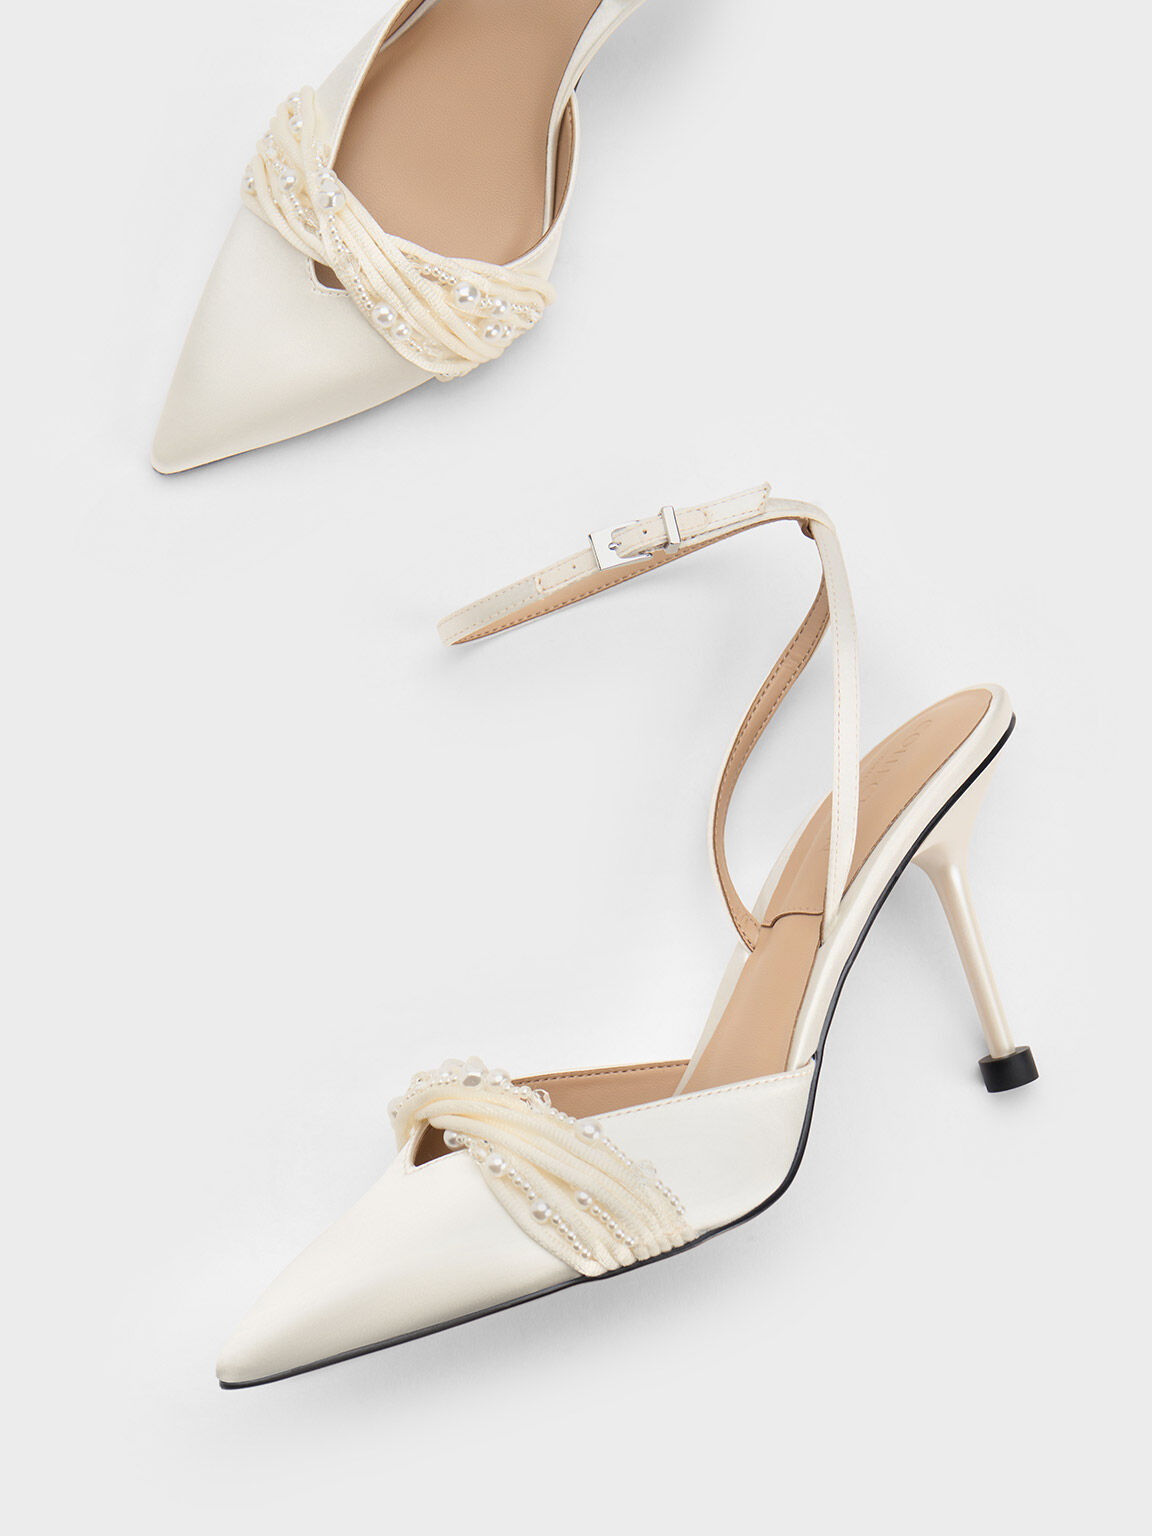 Beaded Satin Ankle-Strap Pumps, White, hi-res